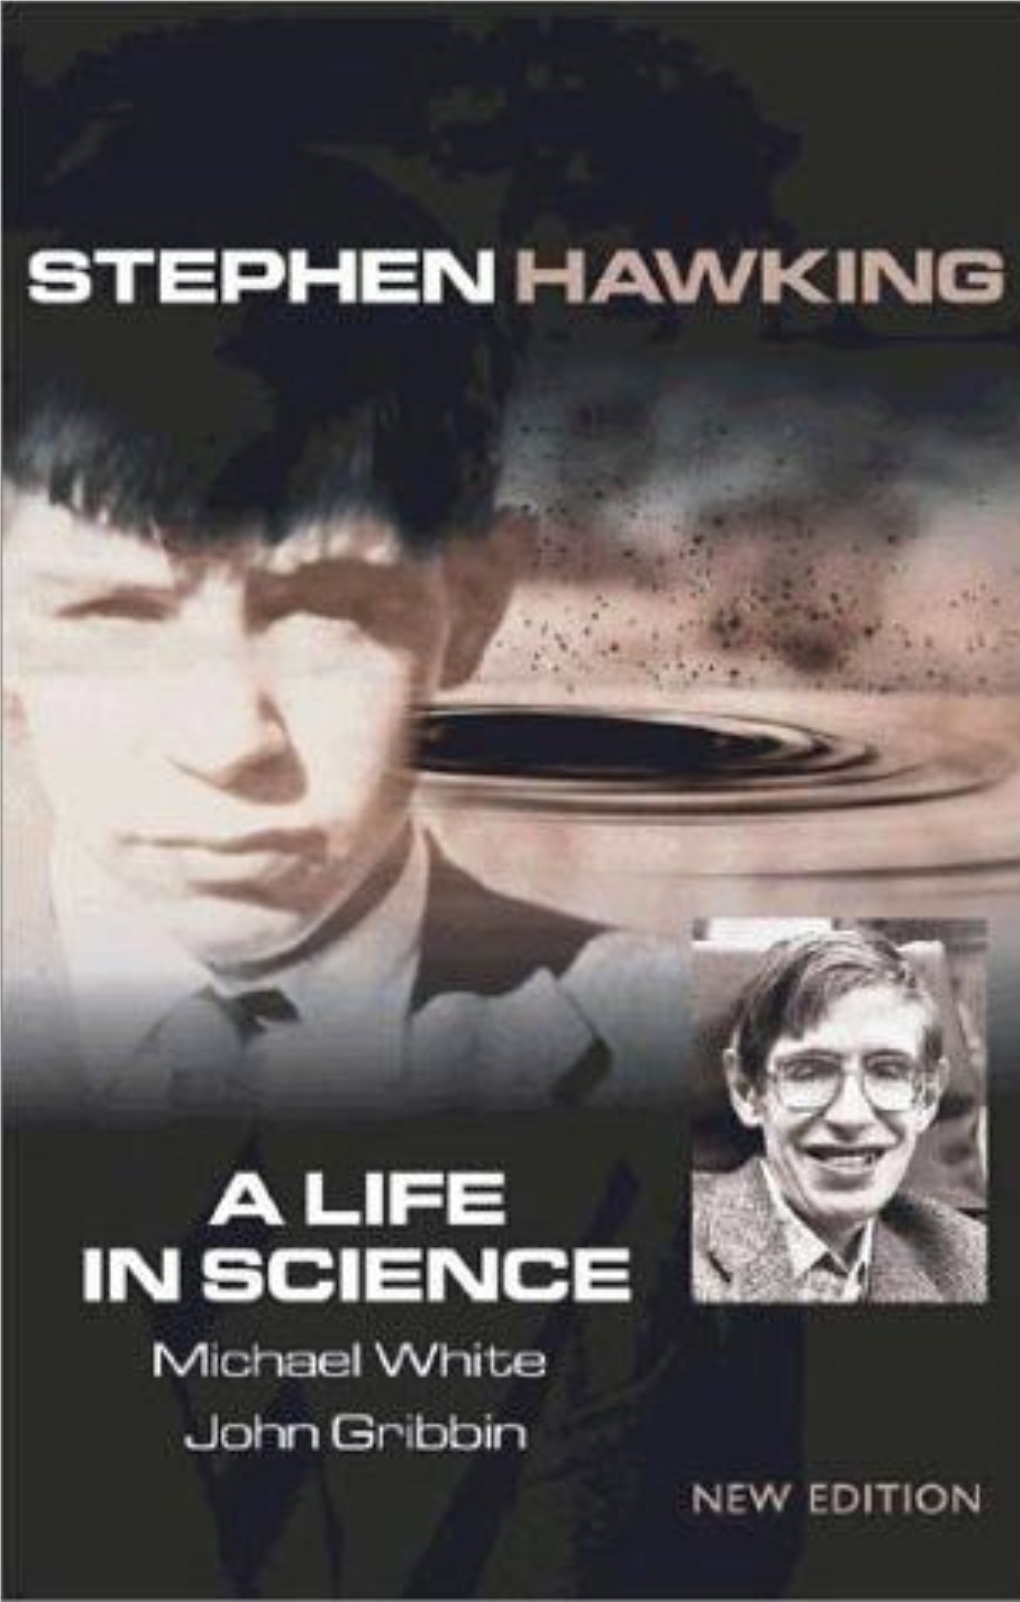 STEPHEN HAWKING a Life in Science